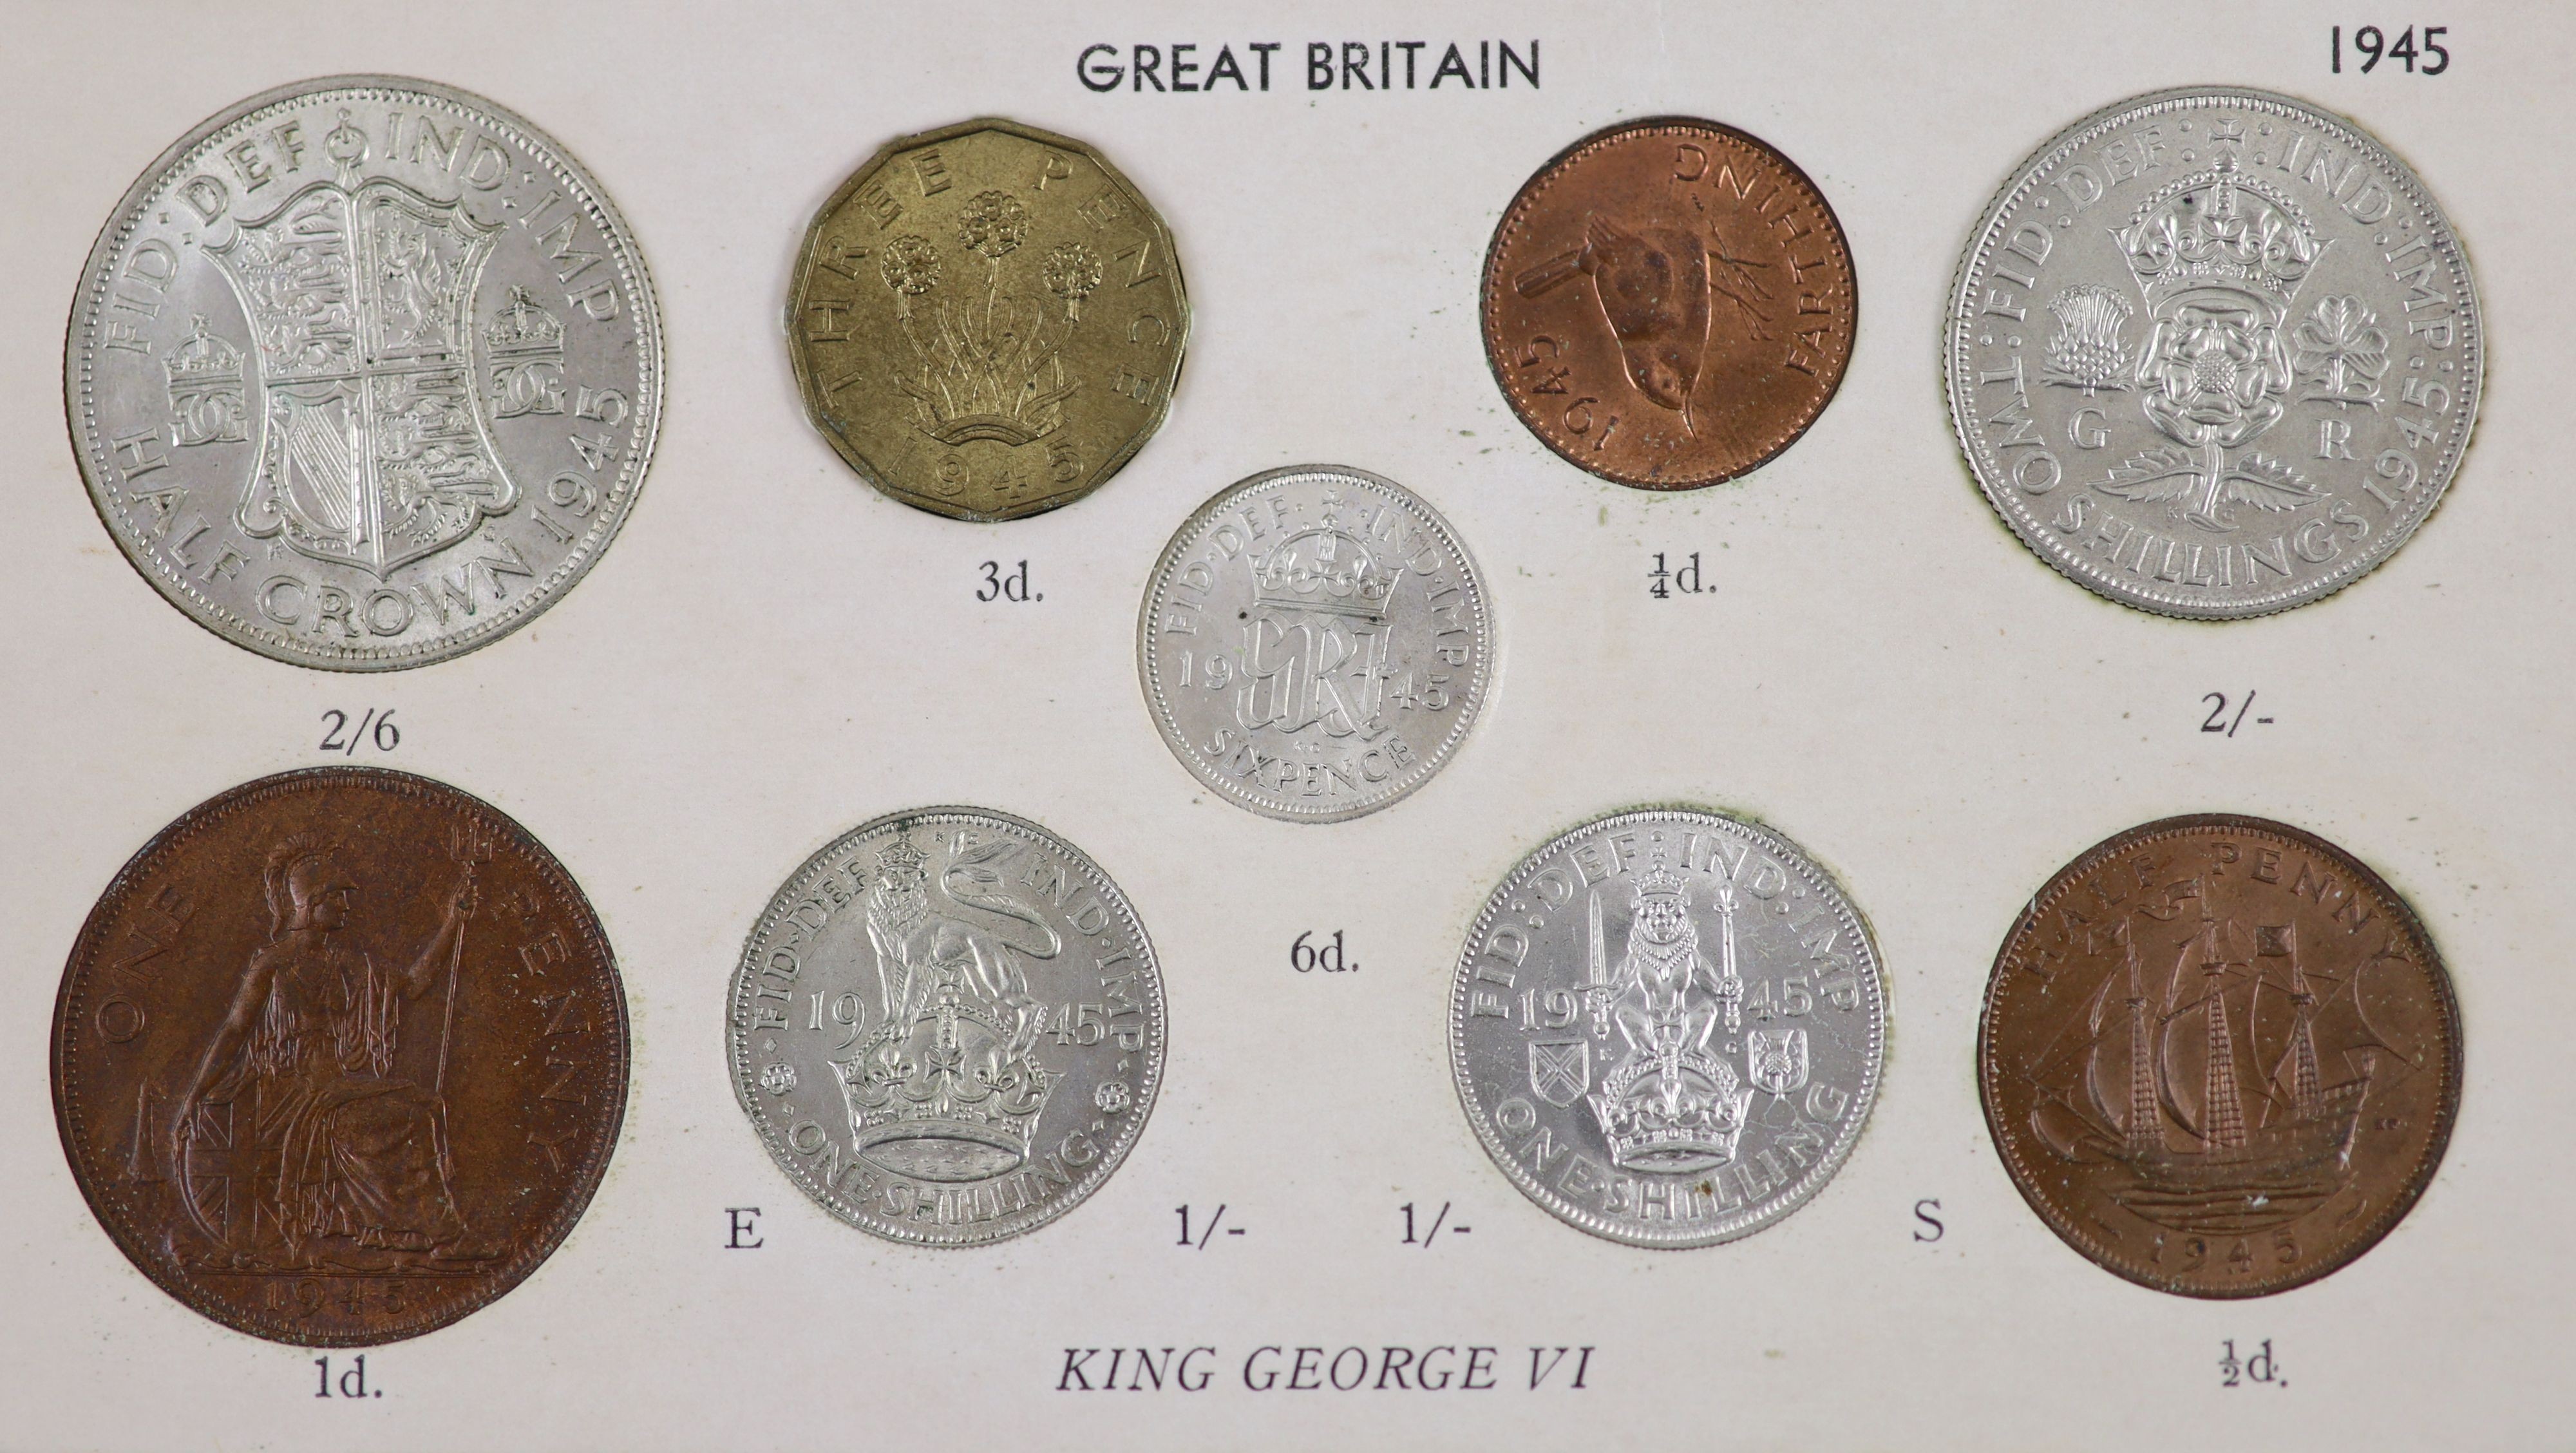 George VI specimen coin sets for 1944 and 1945, including the rare 1944 silver threepence, first coinage, all about EF or better